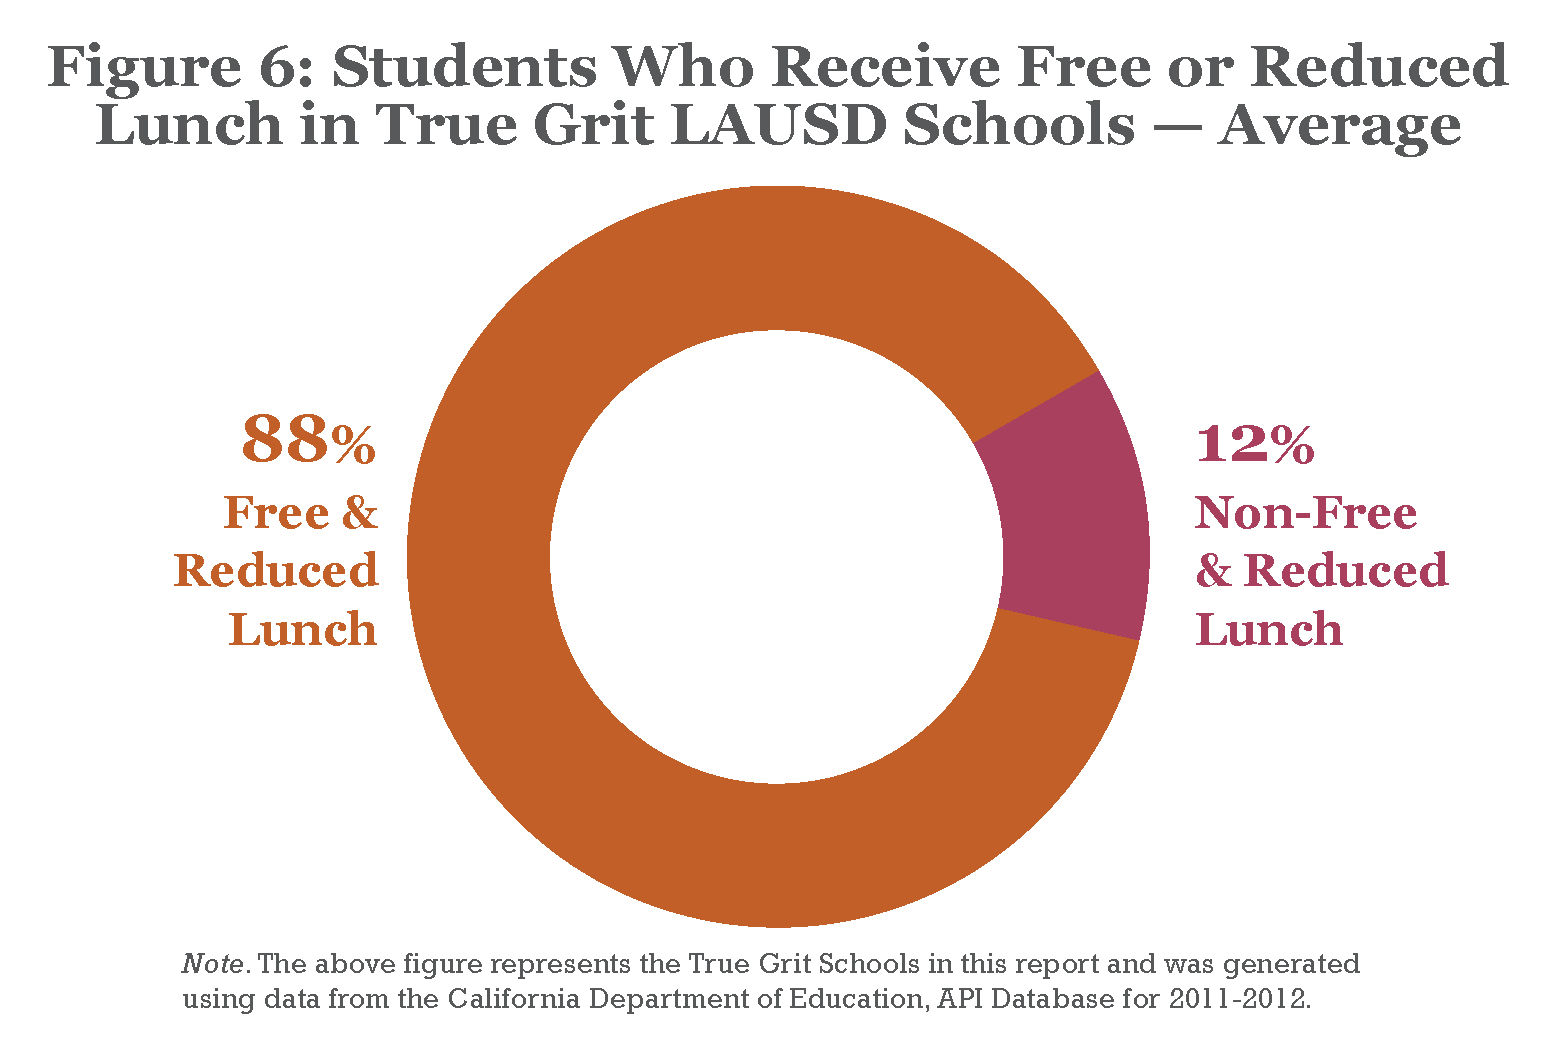 Free Reduced Lunch at True Grit Schools